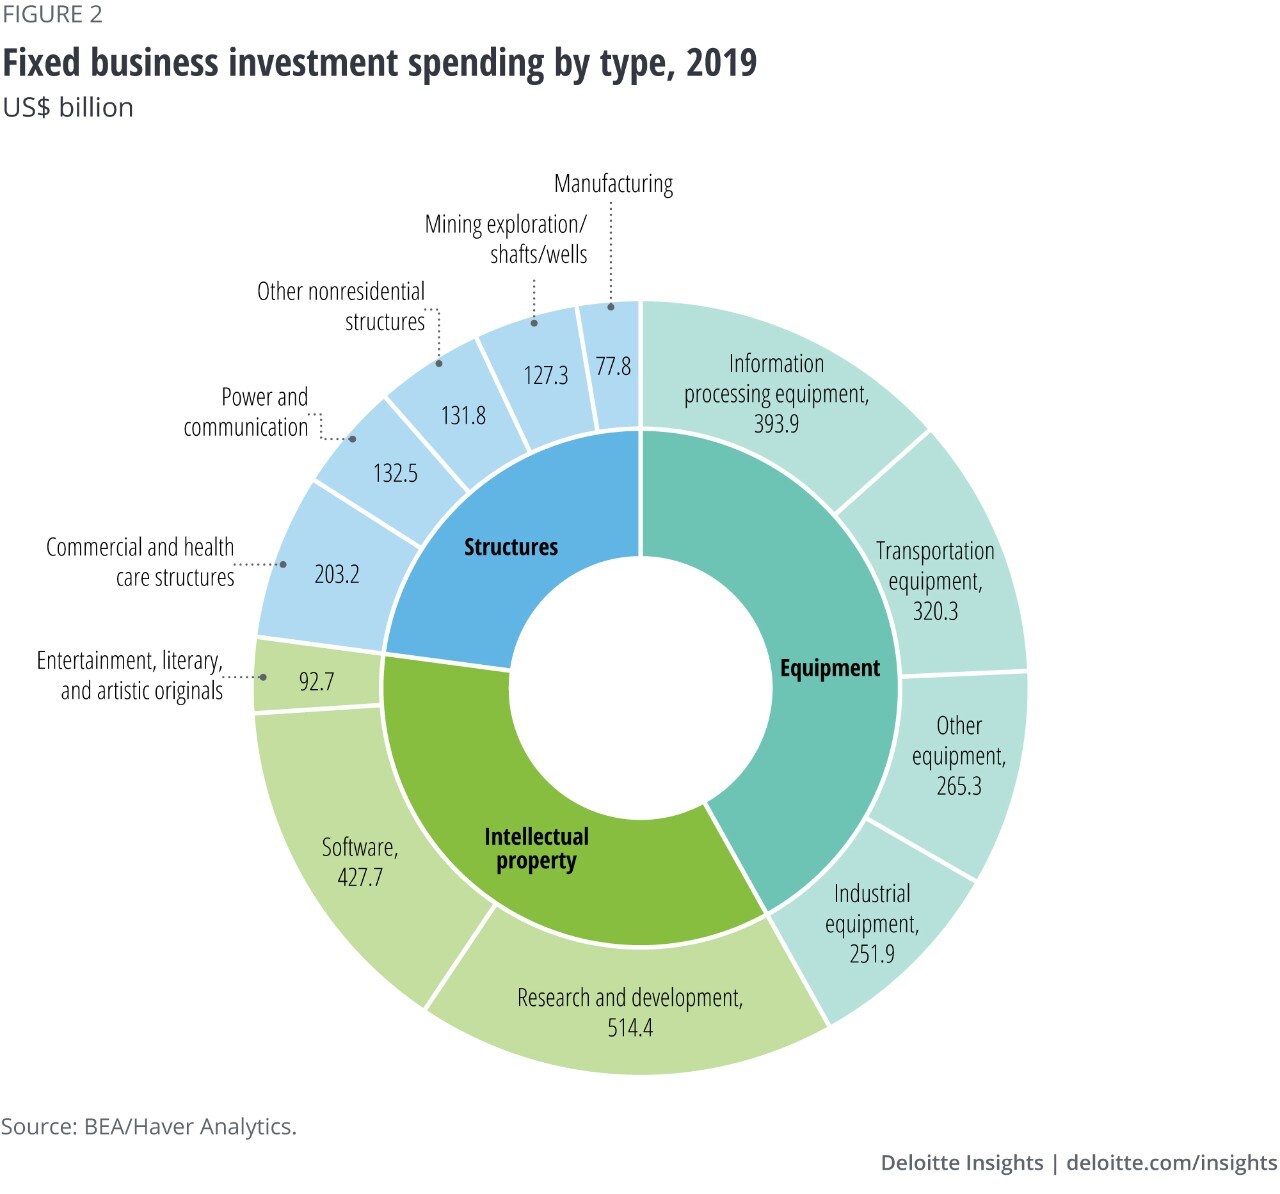 Figure 2. Fixed business investment spending type, 2019